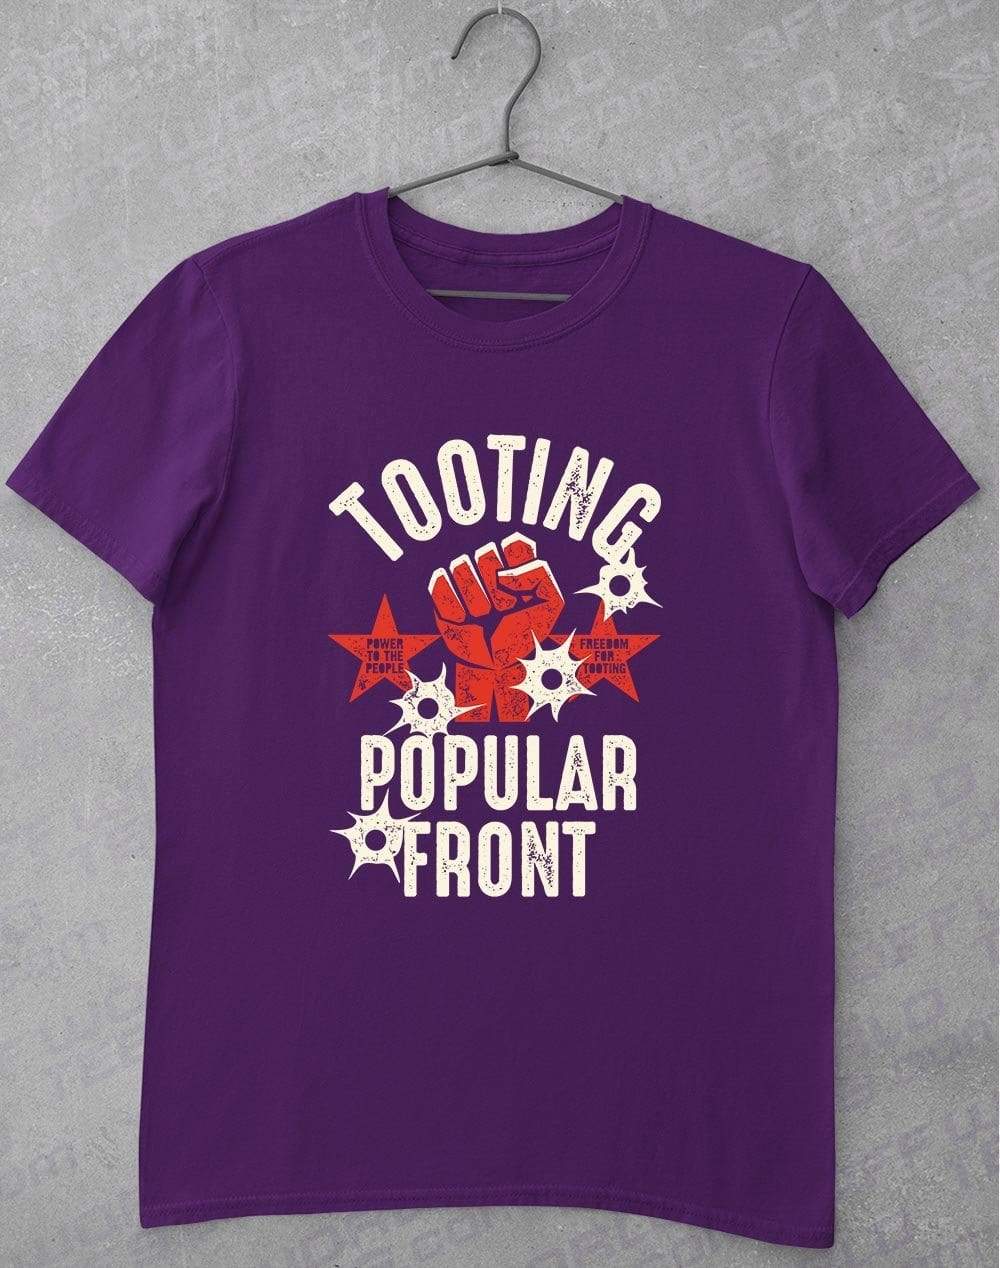 Tooting Popular Front T-Shirt S / Purple  - Off World Tees